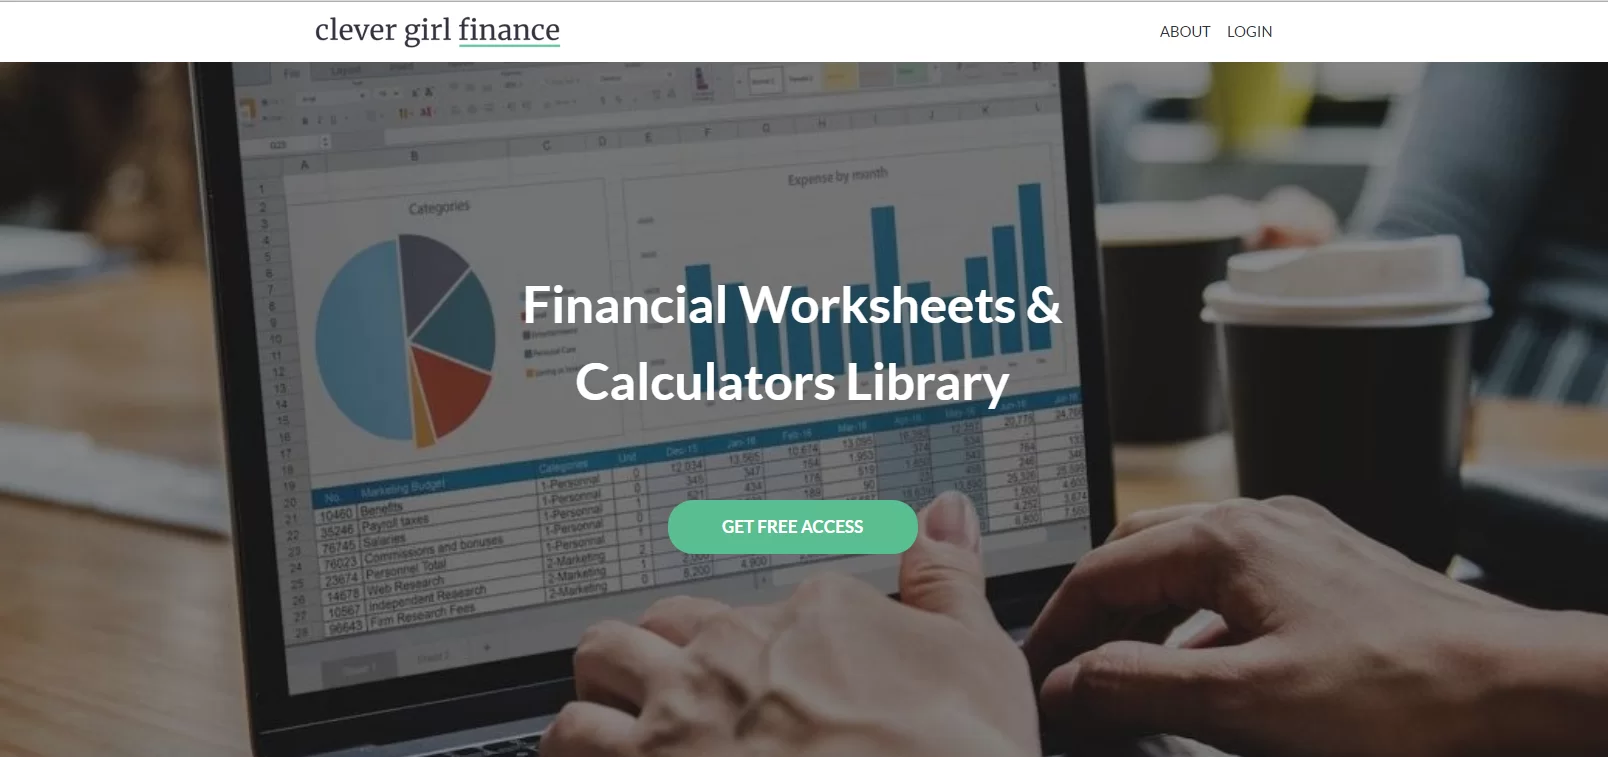 Financial Worksheets & Calculators Library Lead Magnet Ideas